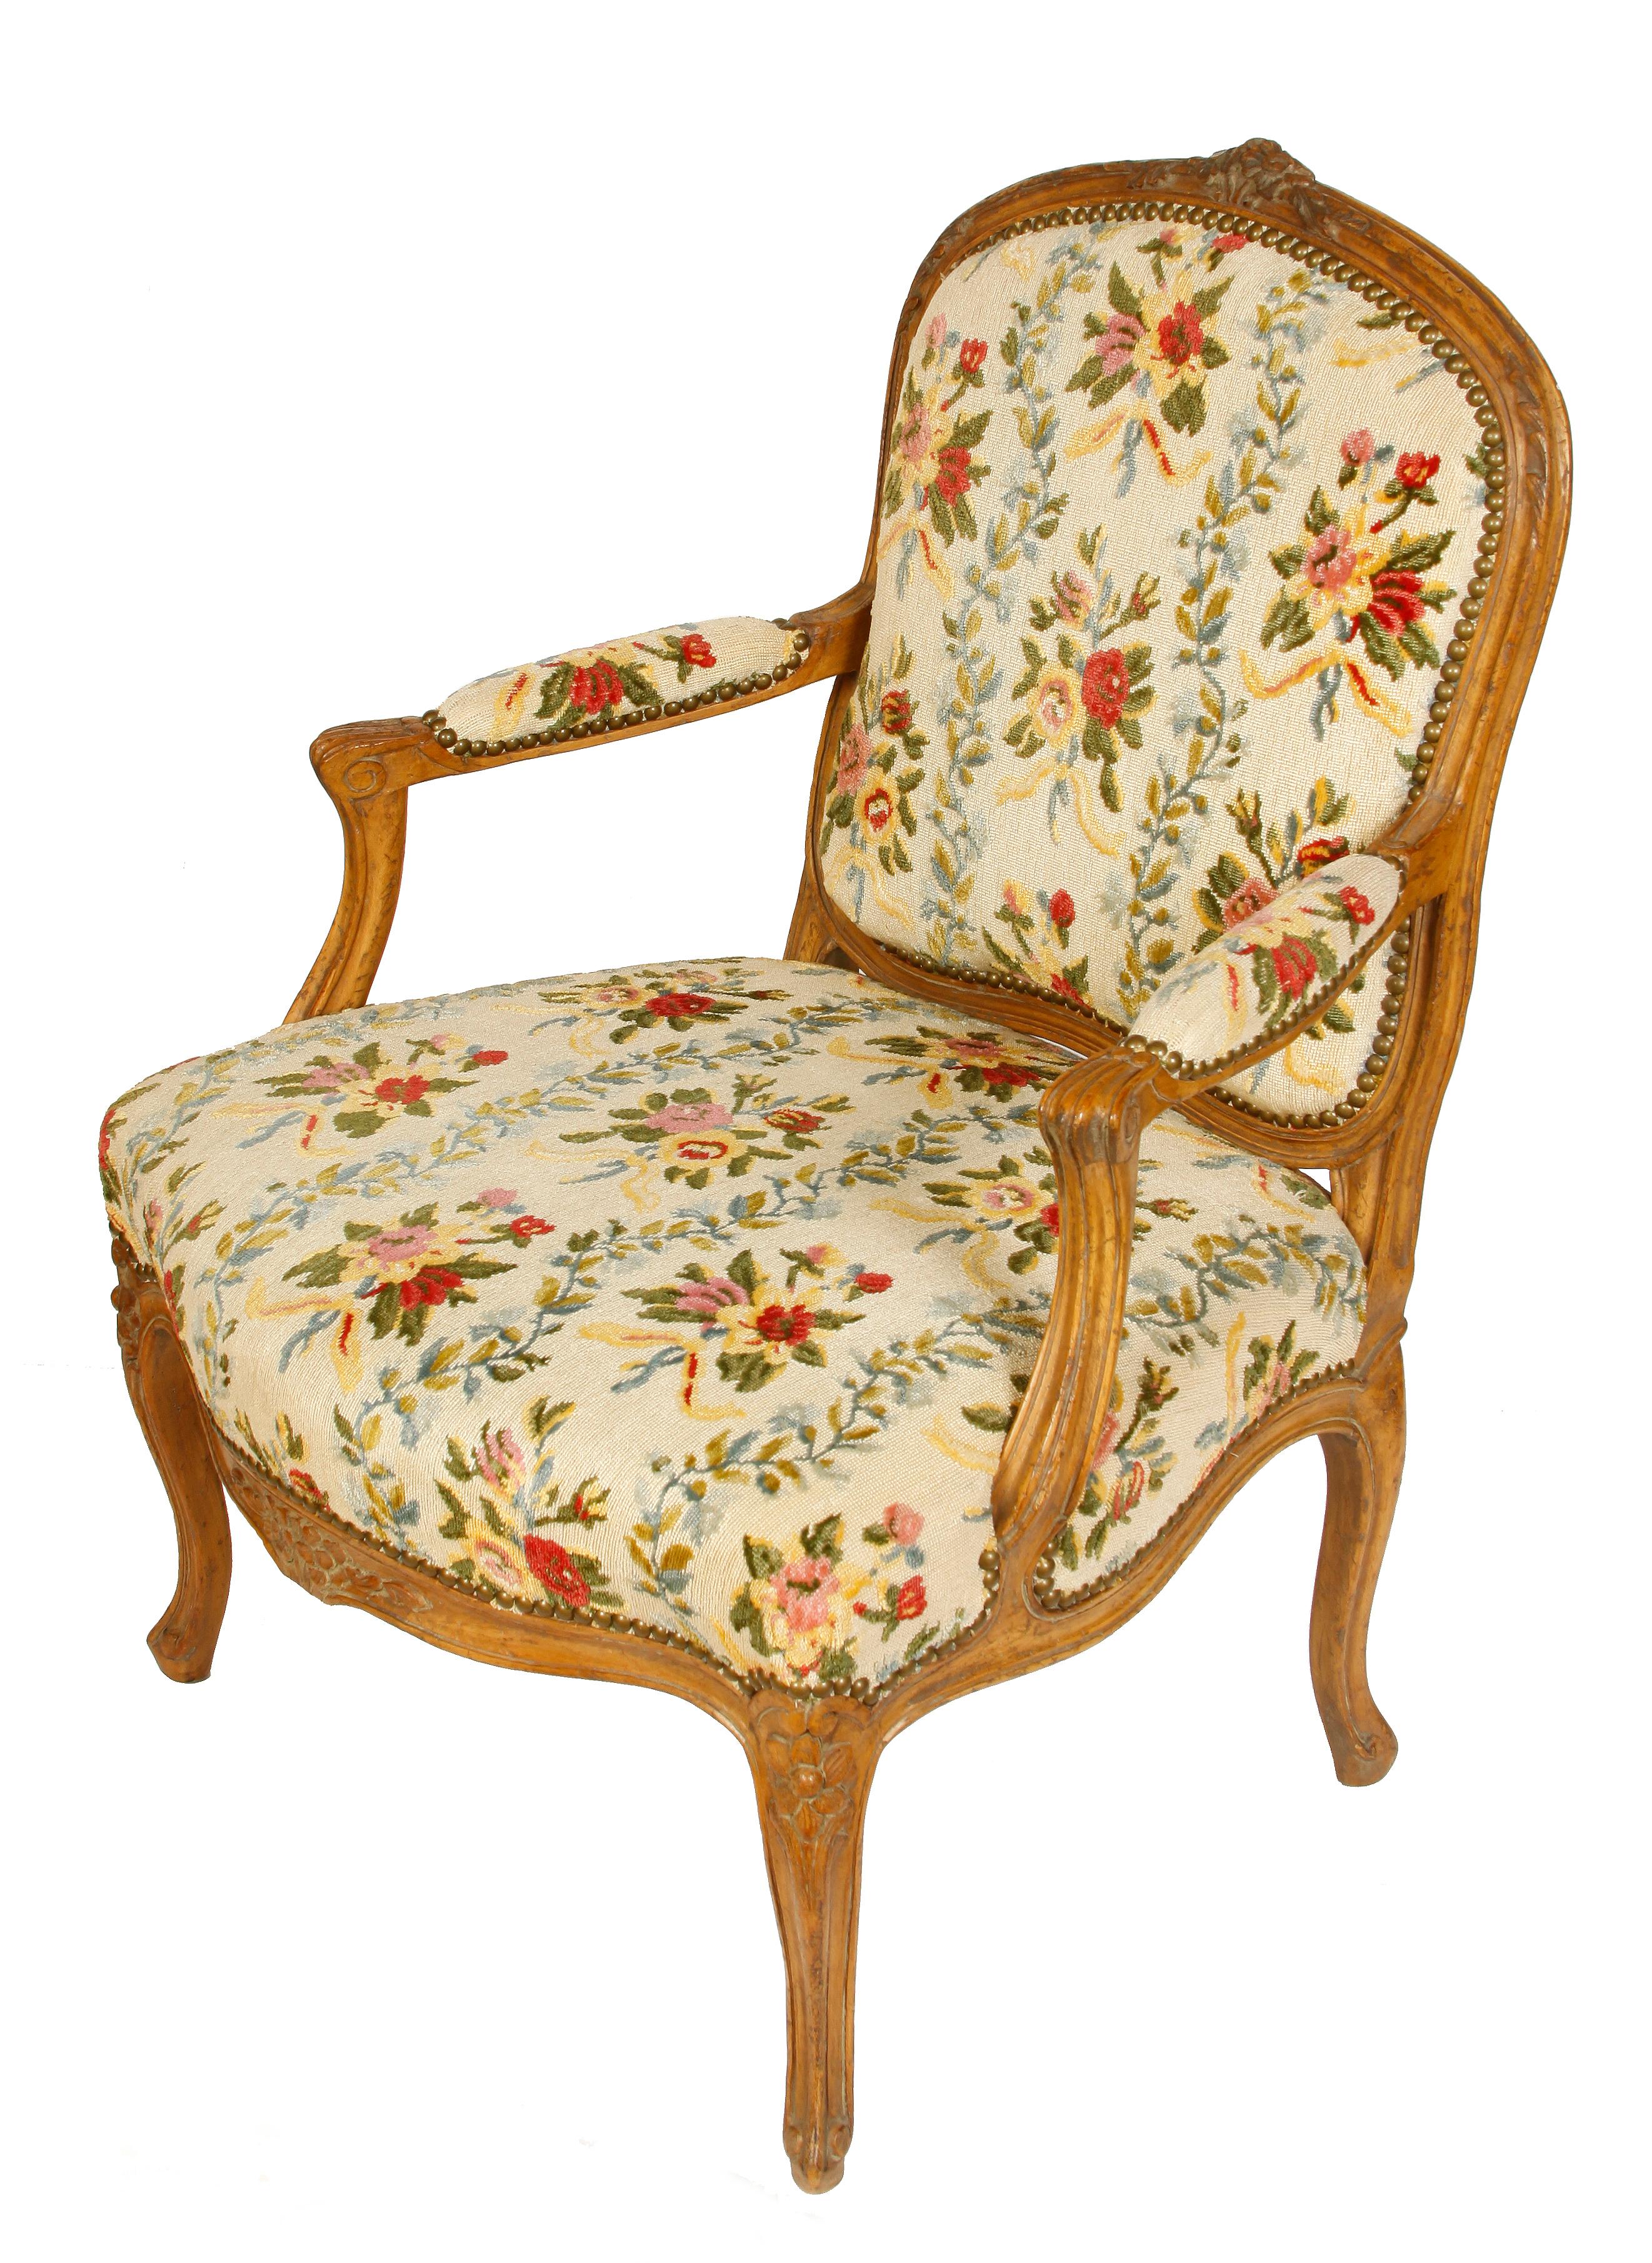 French Louis XV style fauteuil in a lovely floral petit point pattern. Curved legs with carved floral details to back, apron and legs.